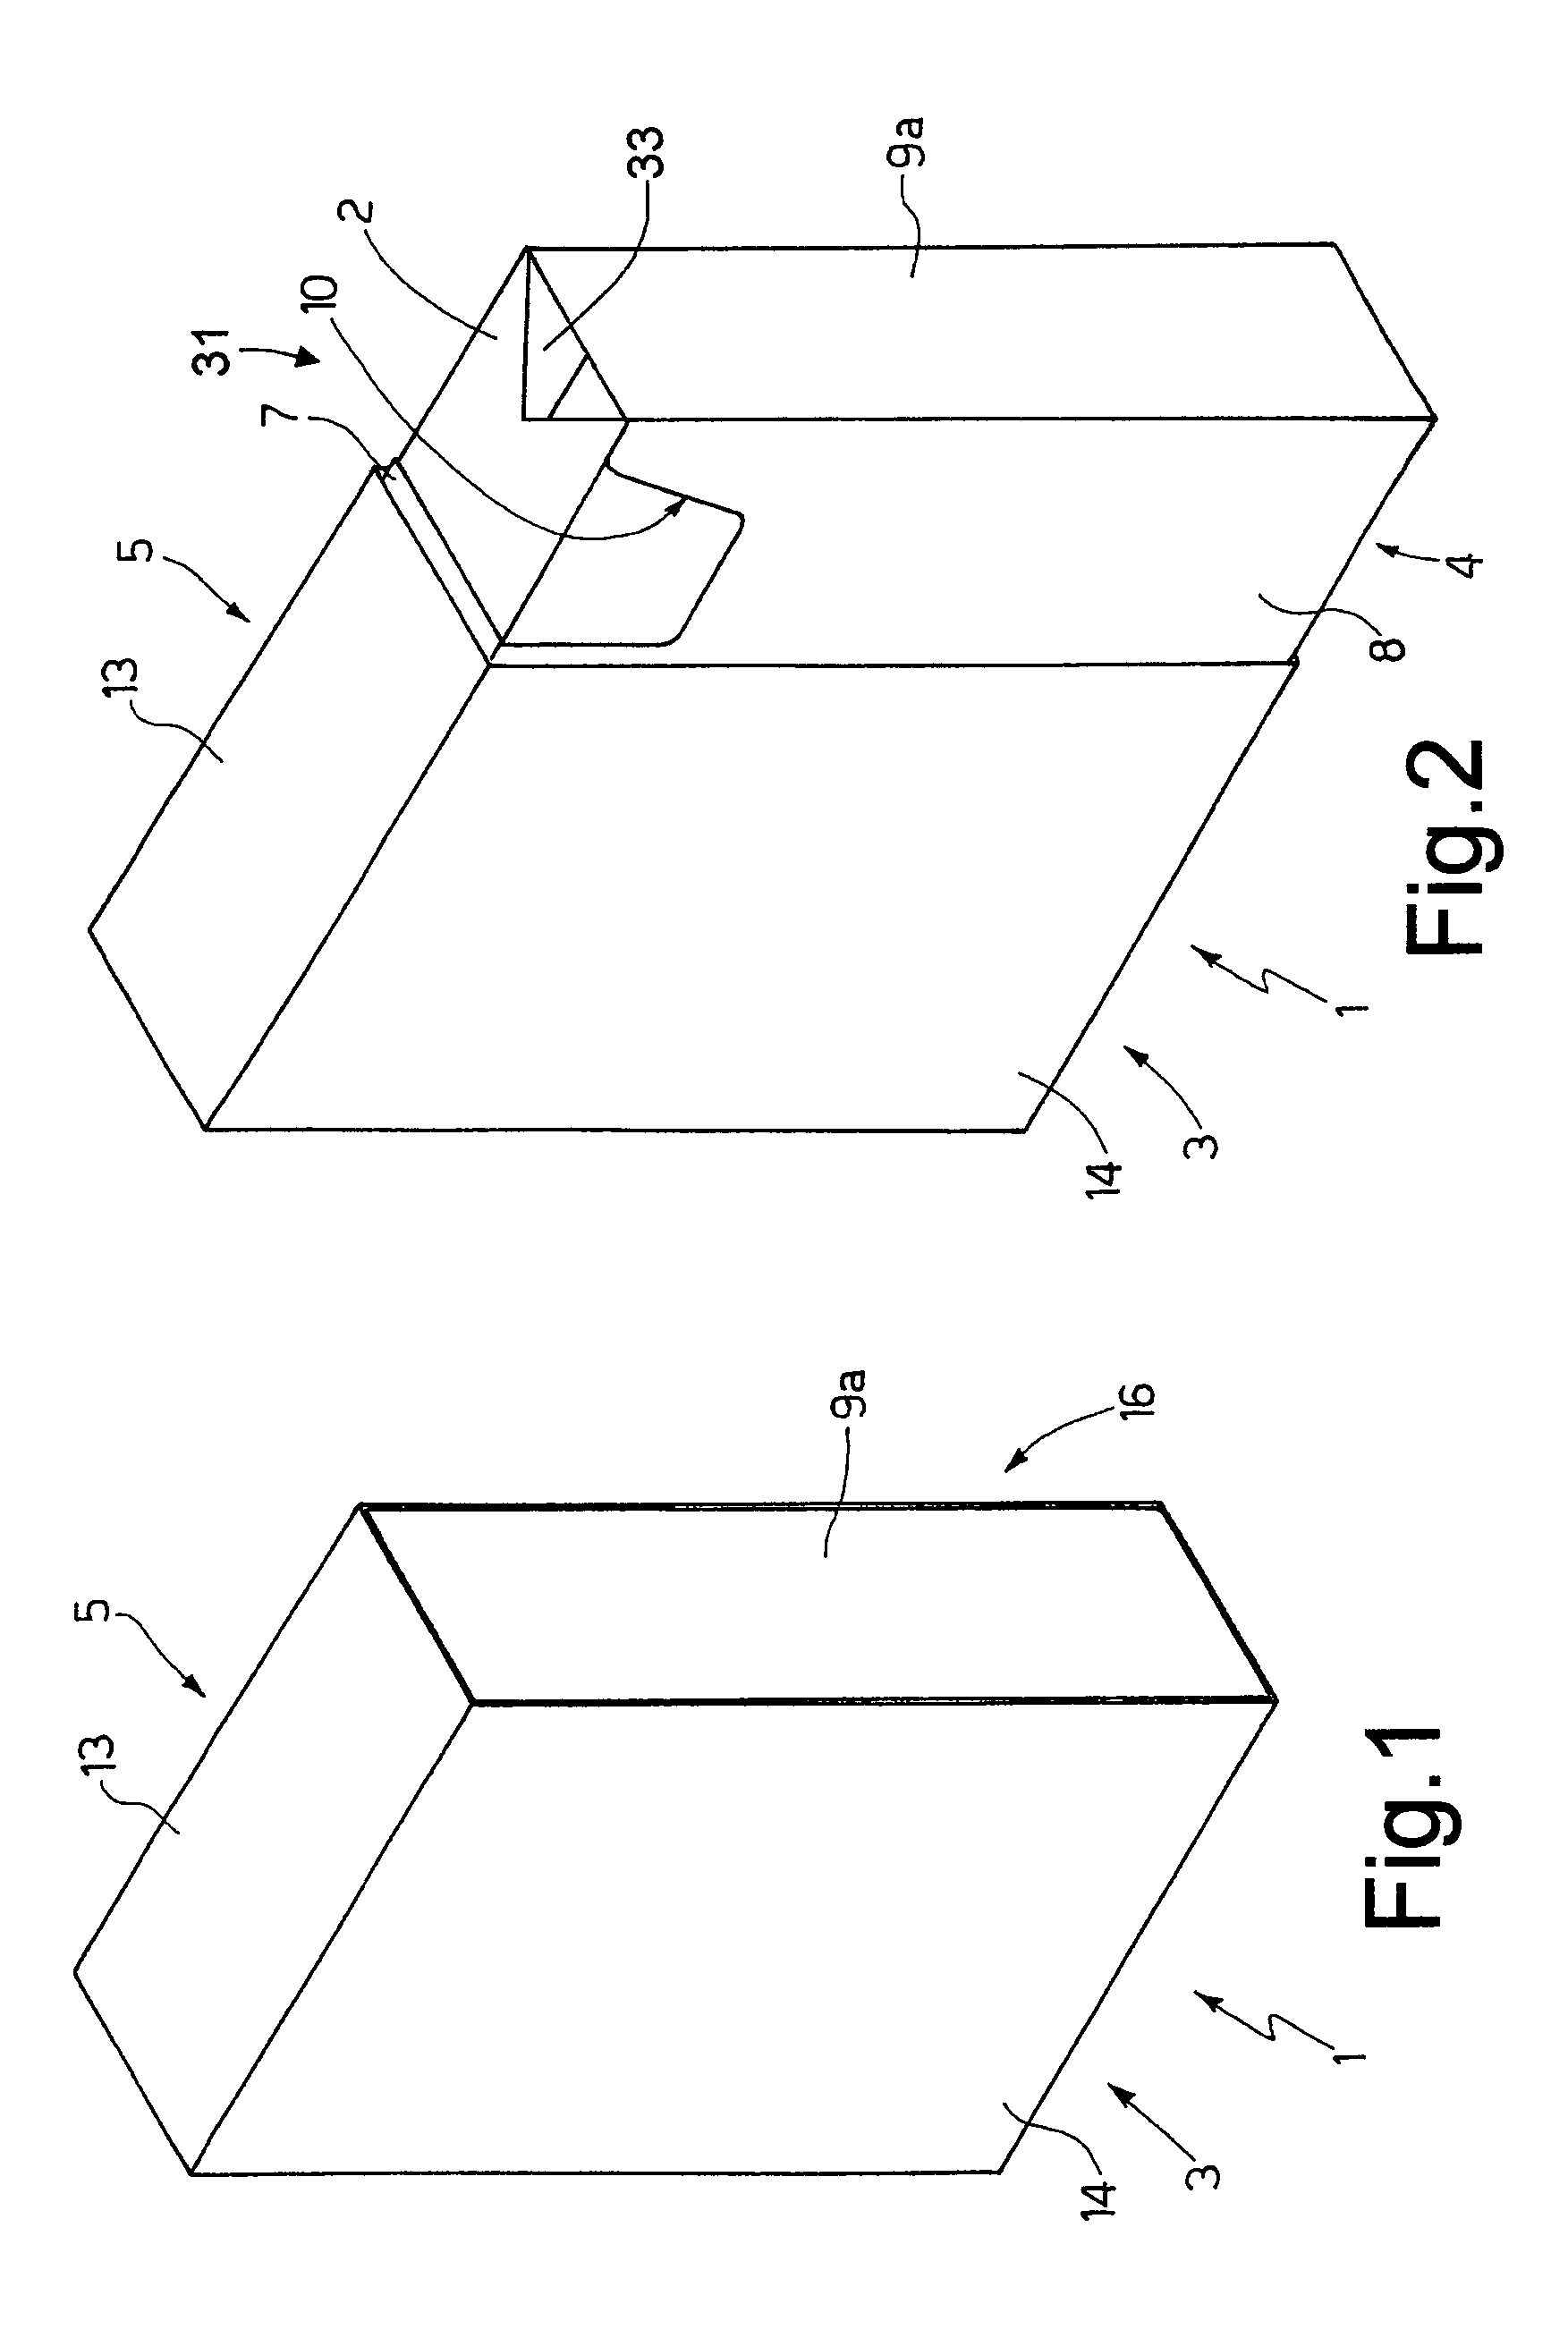 Packet of cigarettes, and method of producing a packet of cigarettes